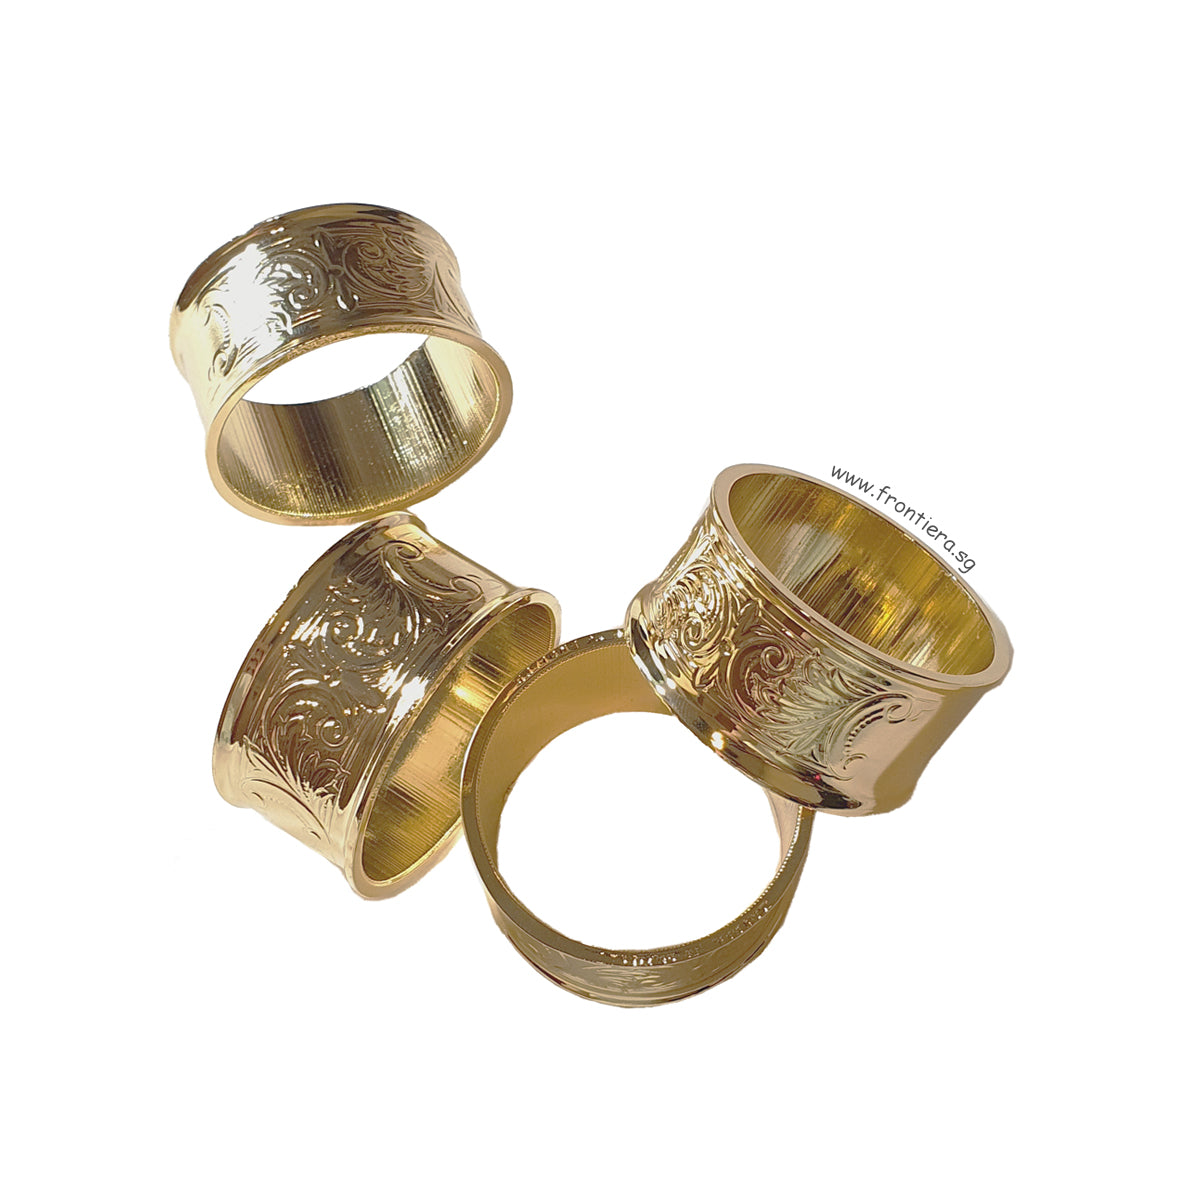 [England Silverware] Gold Plated Napkin Ring [Set of 4]